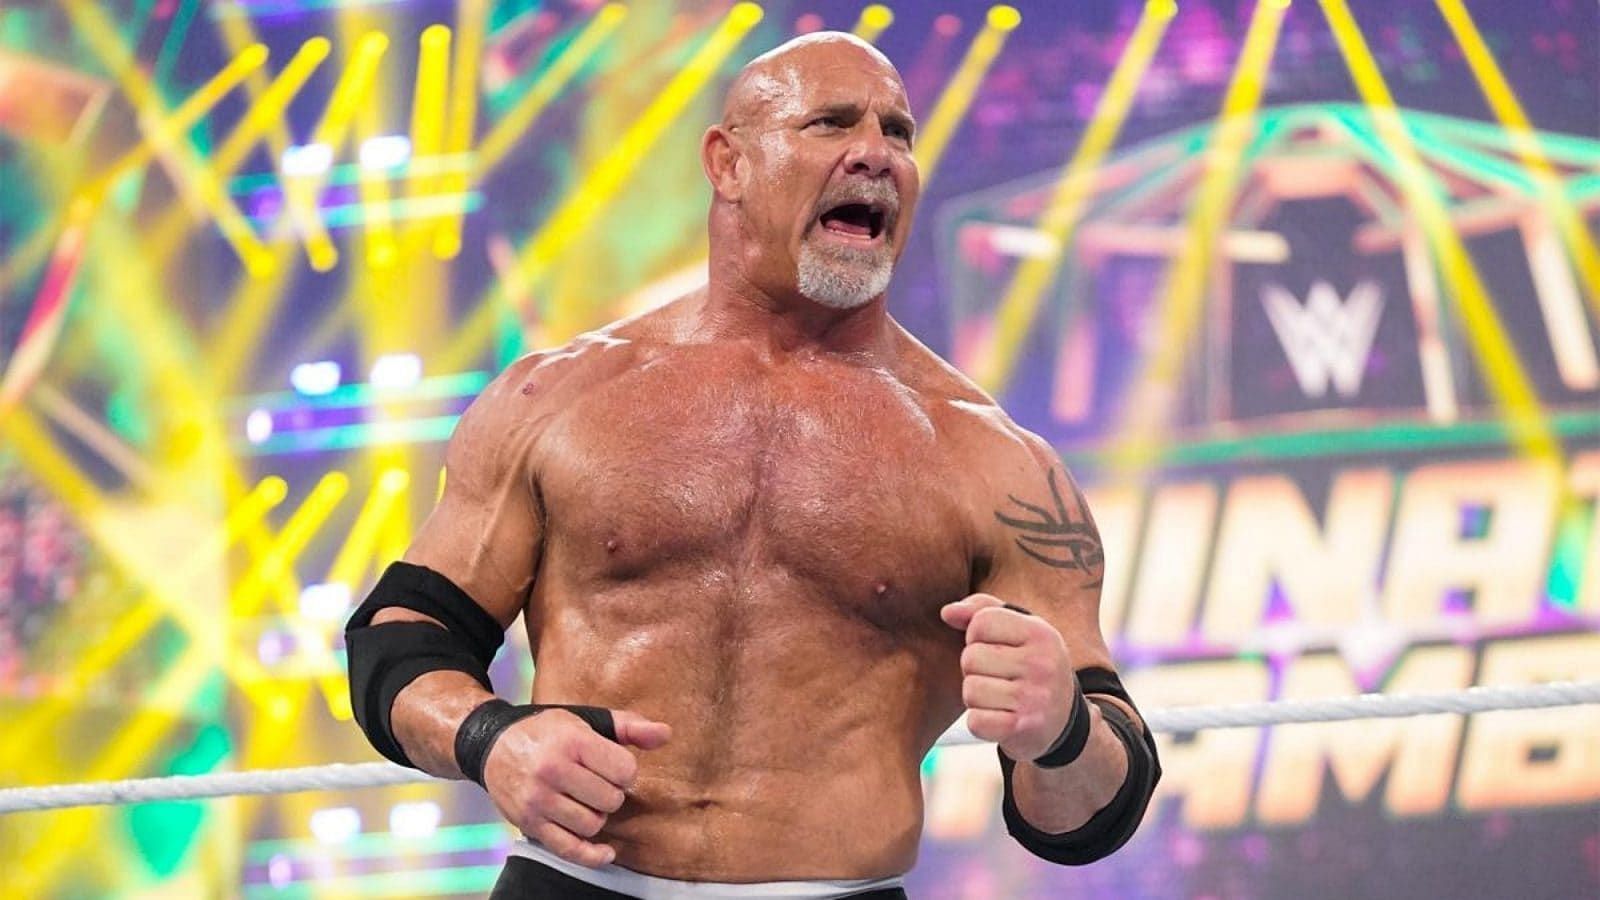 Goldberg has wrestled 12 matches over the last 6 years